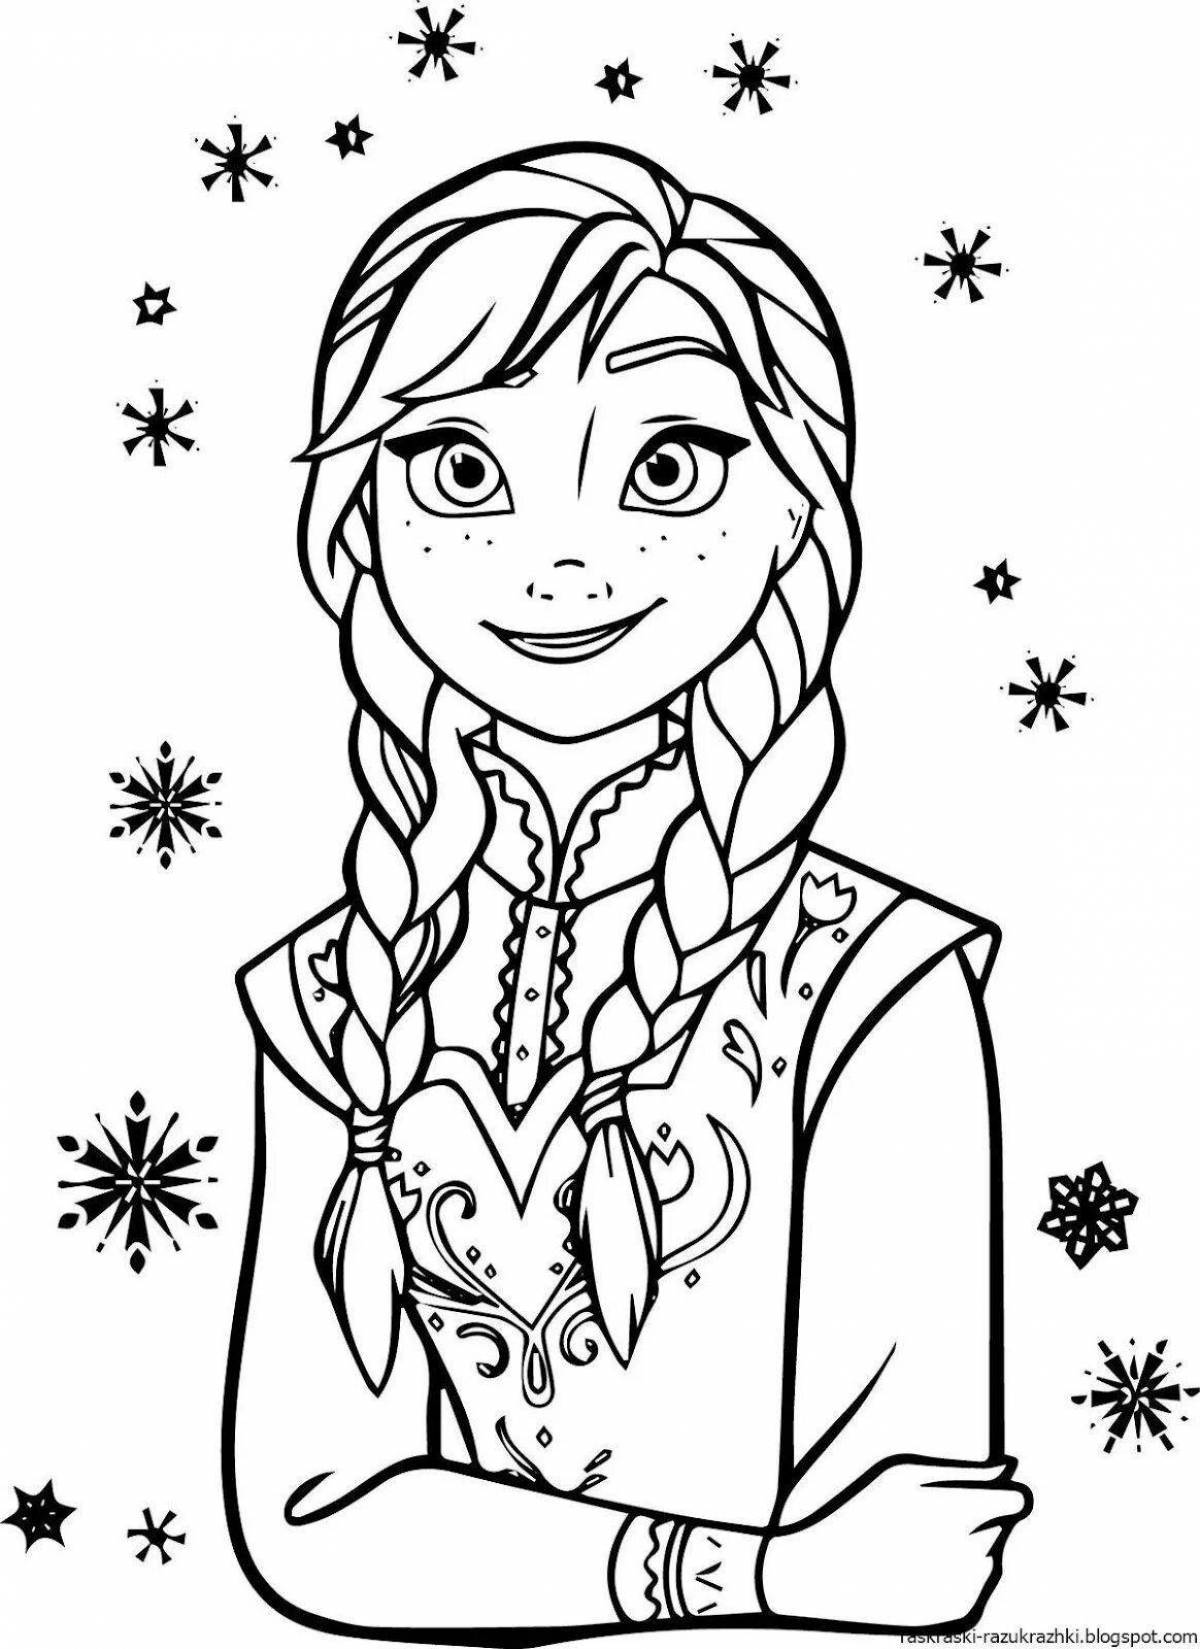 Charming elsa coloring book for kids 6-7 years old